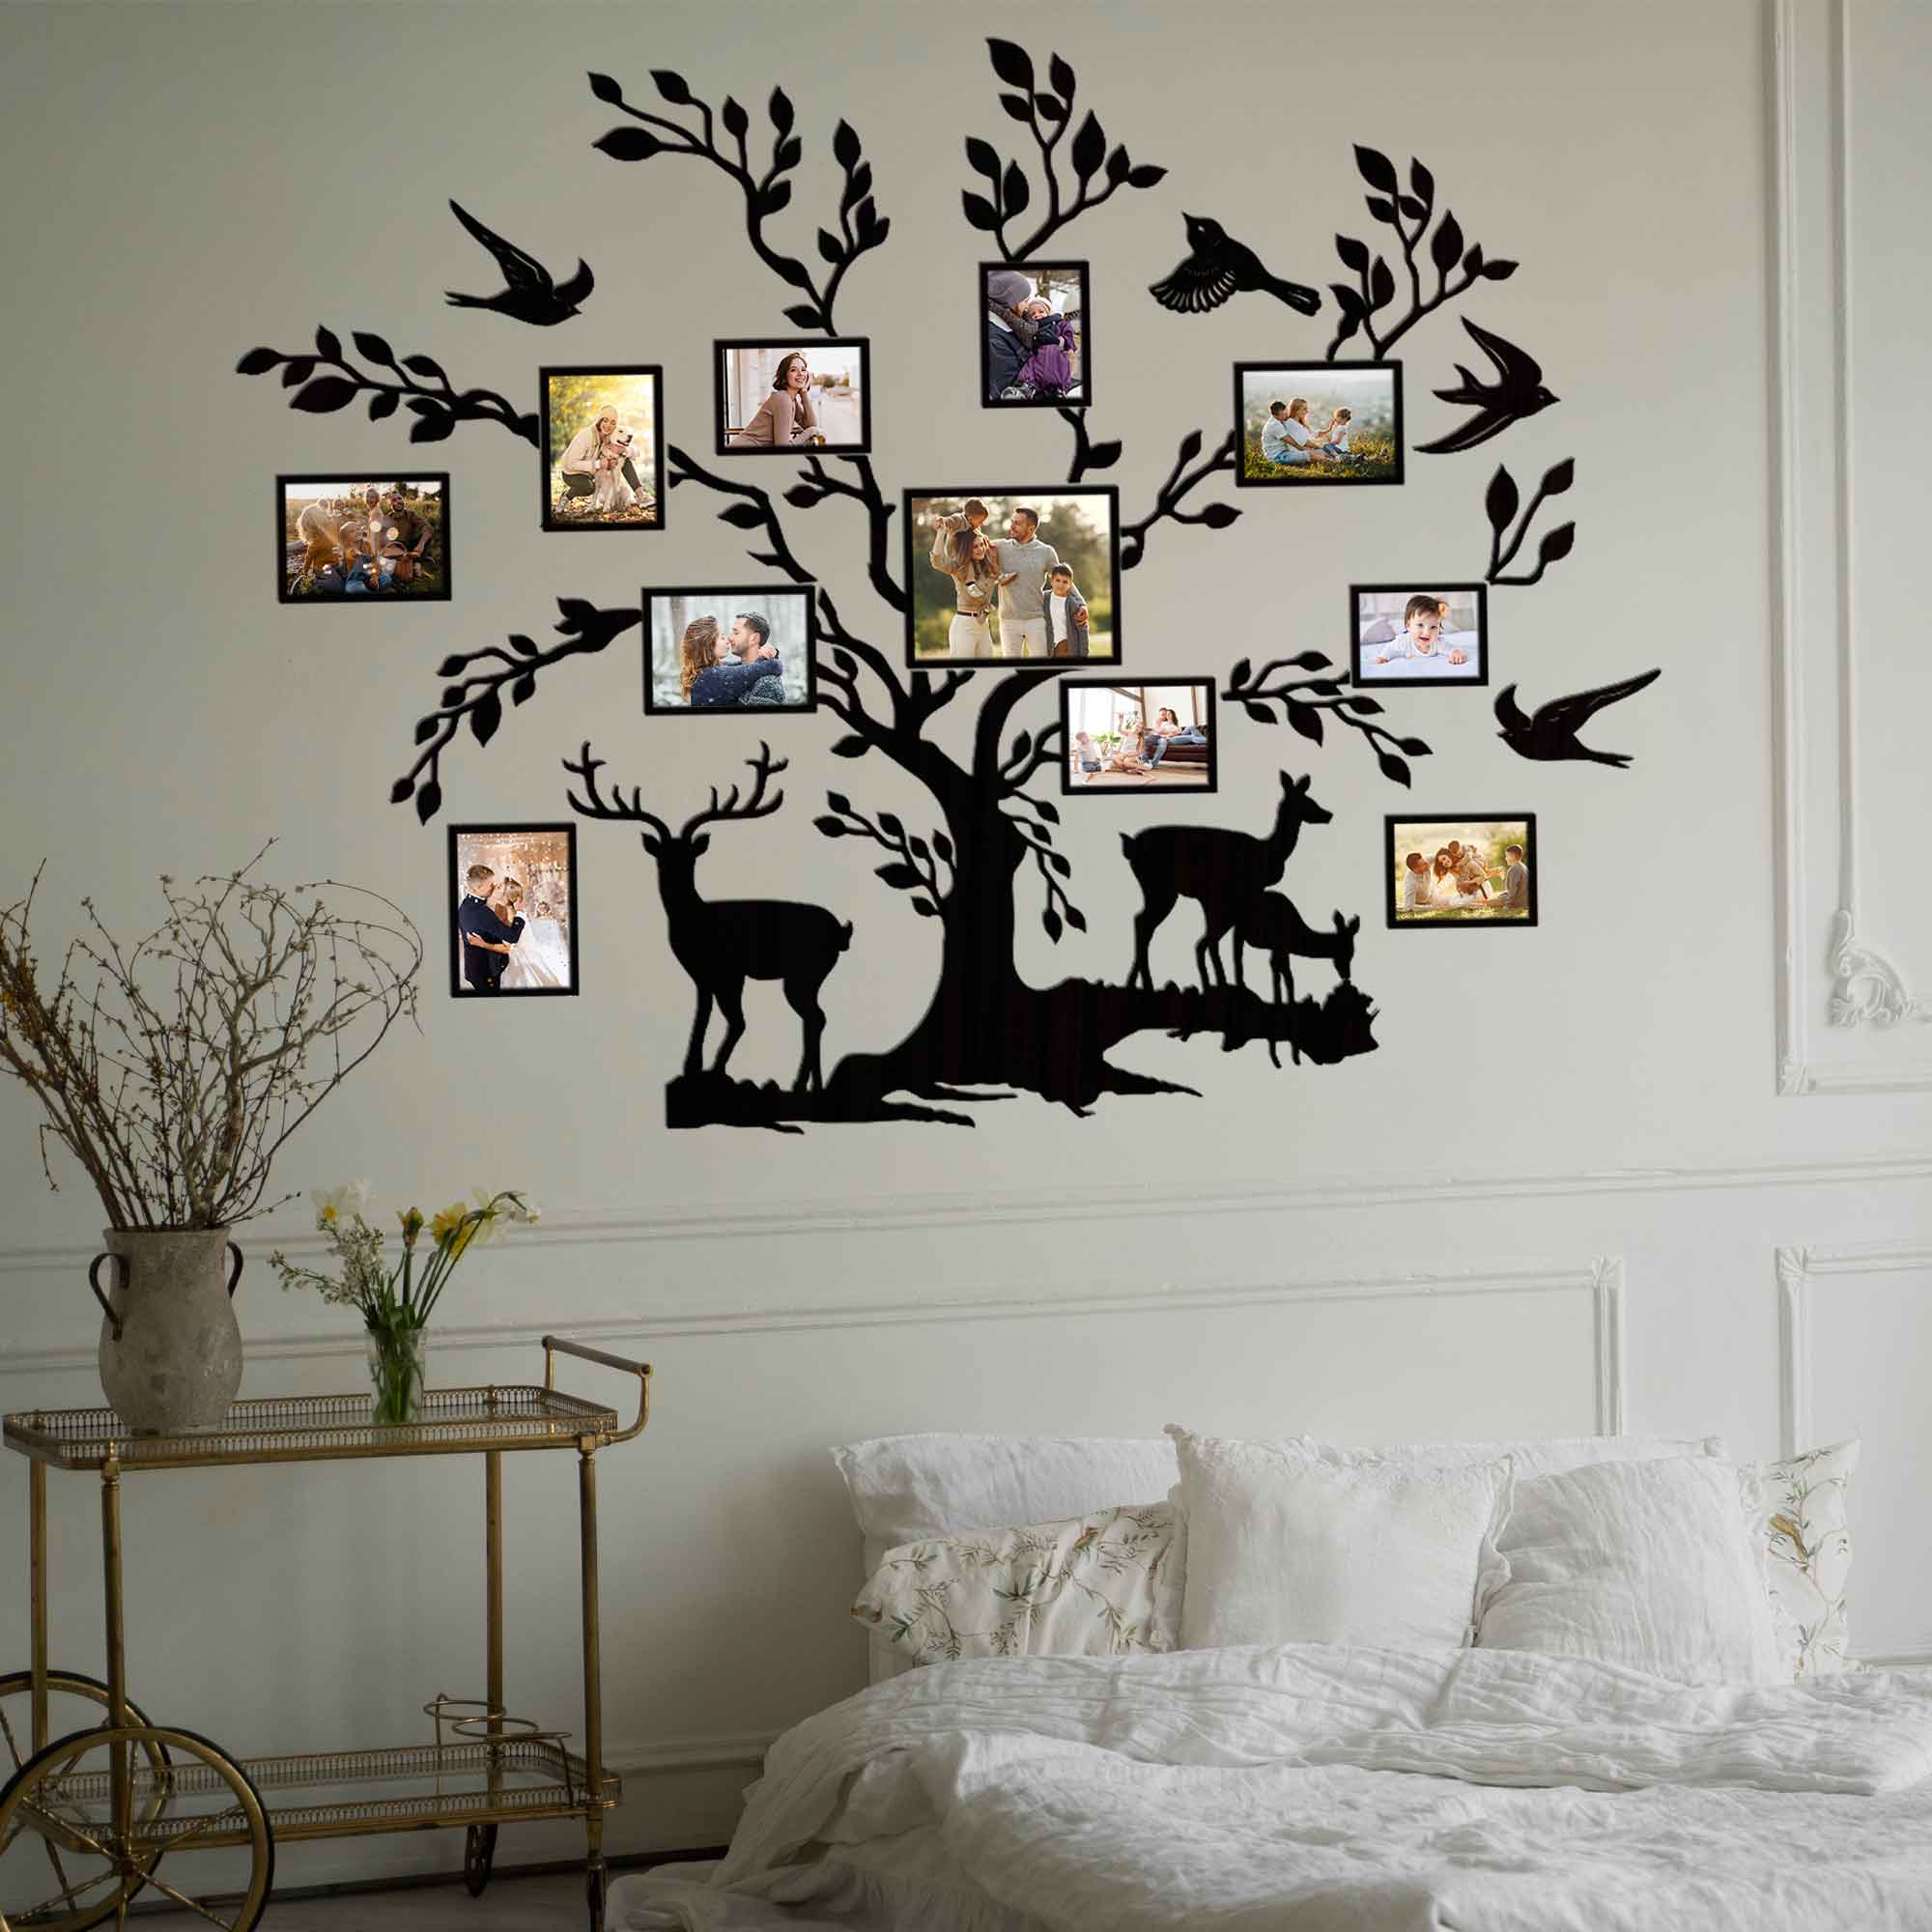 Large Family Photos Collage Framed in a Beautiful Wood Tree